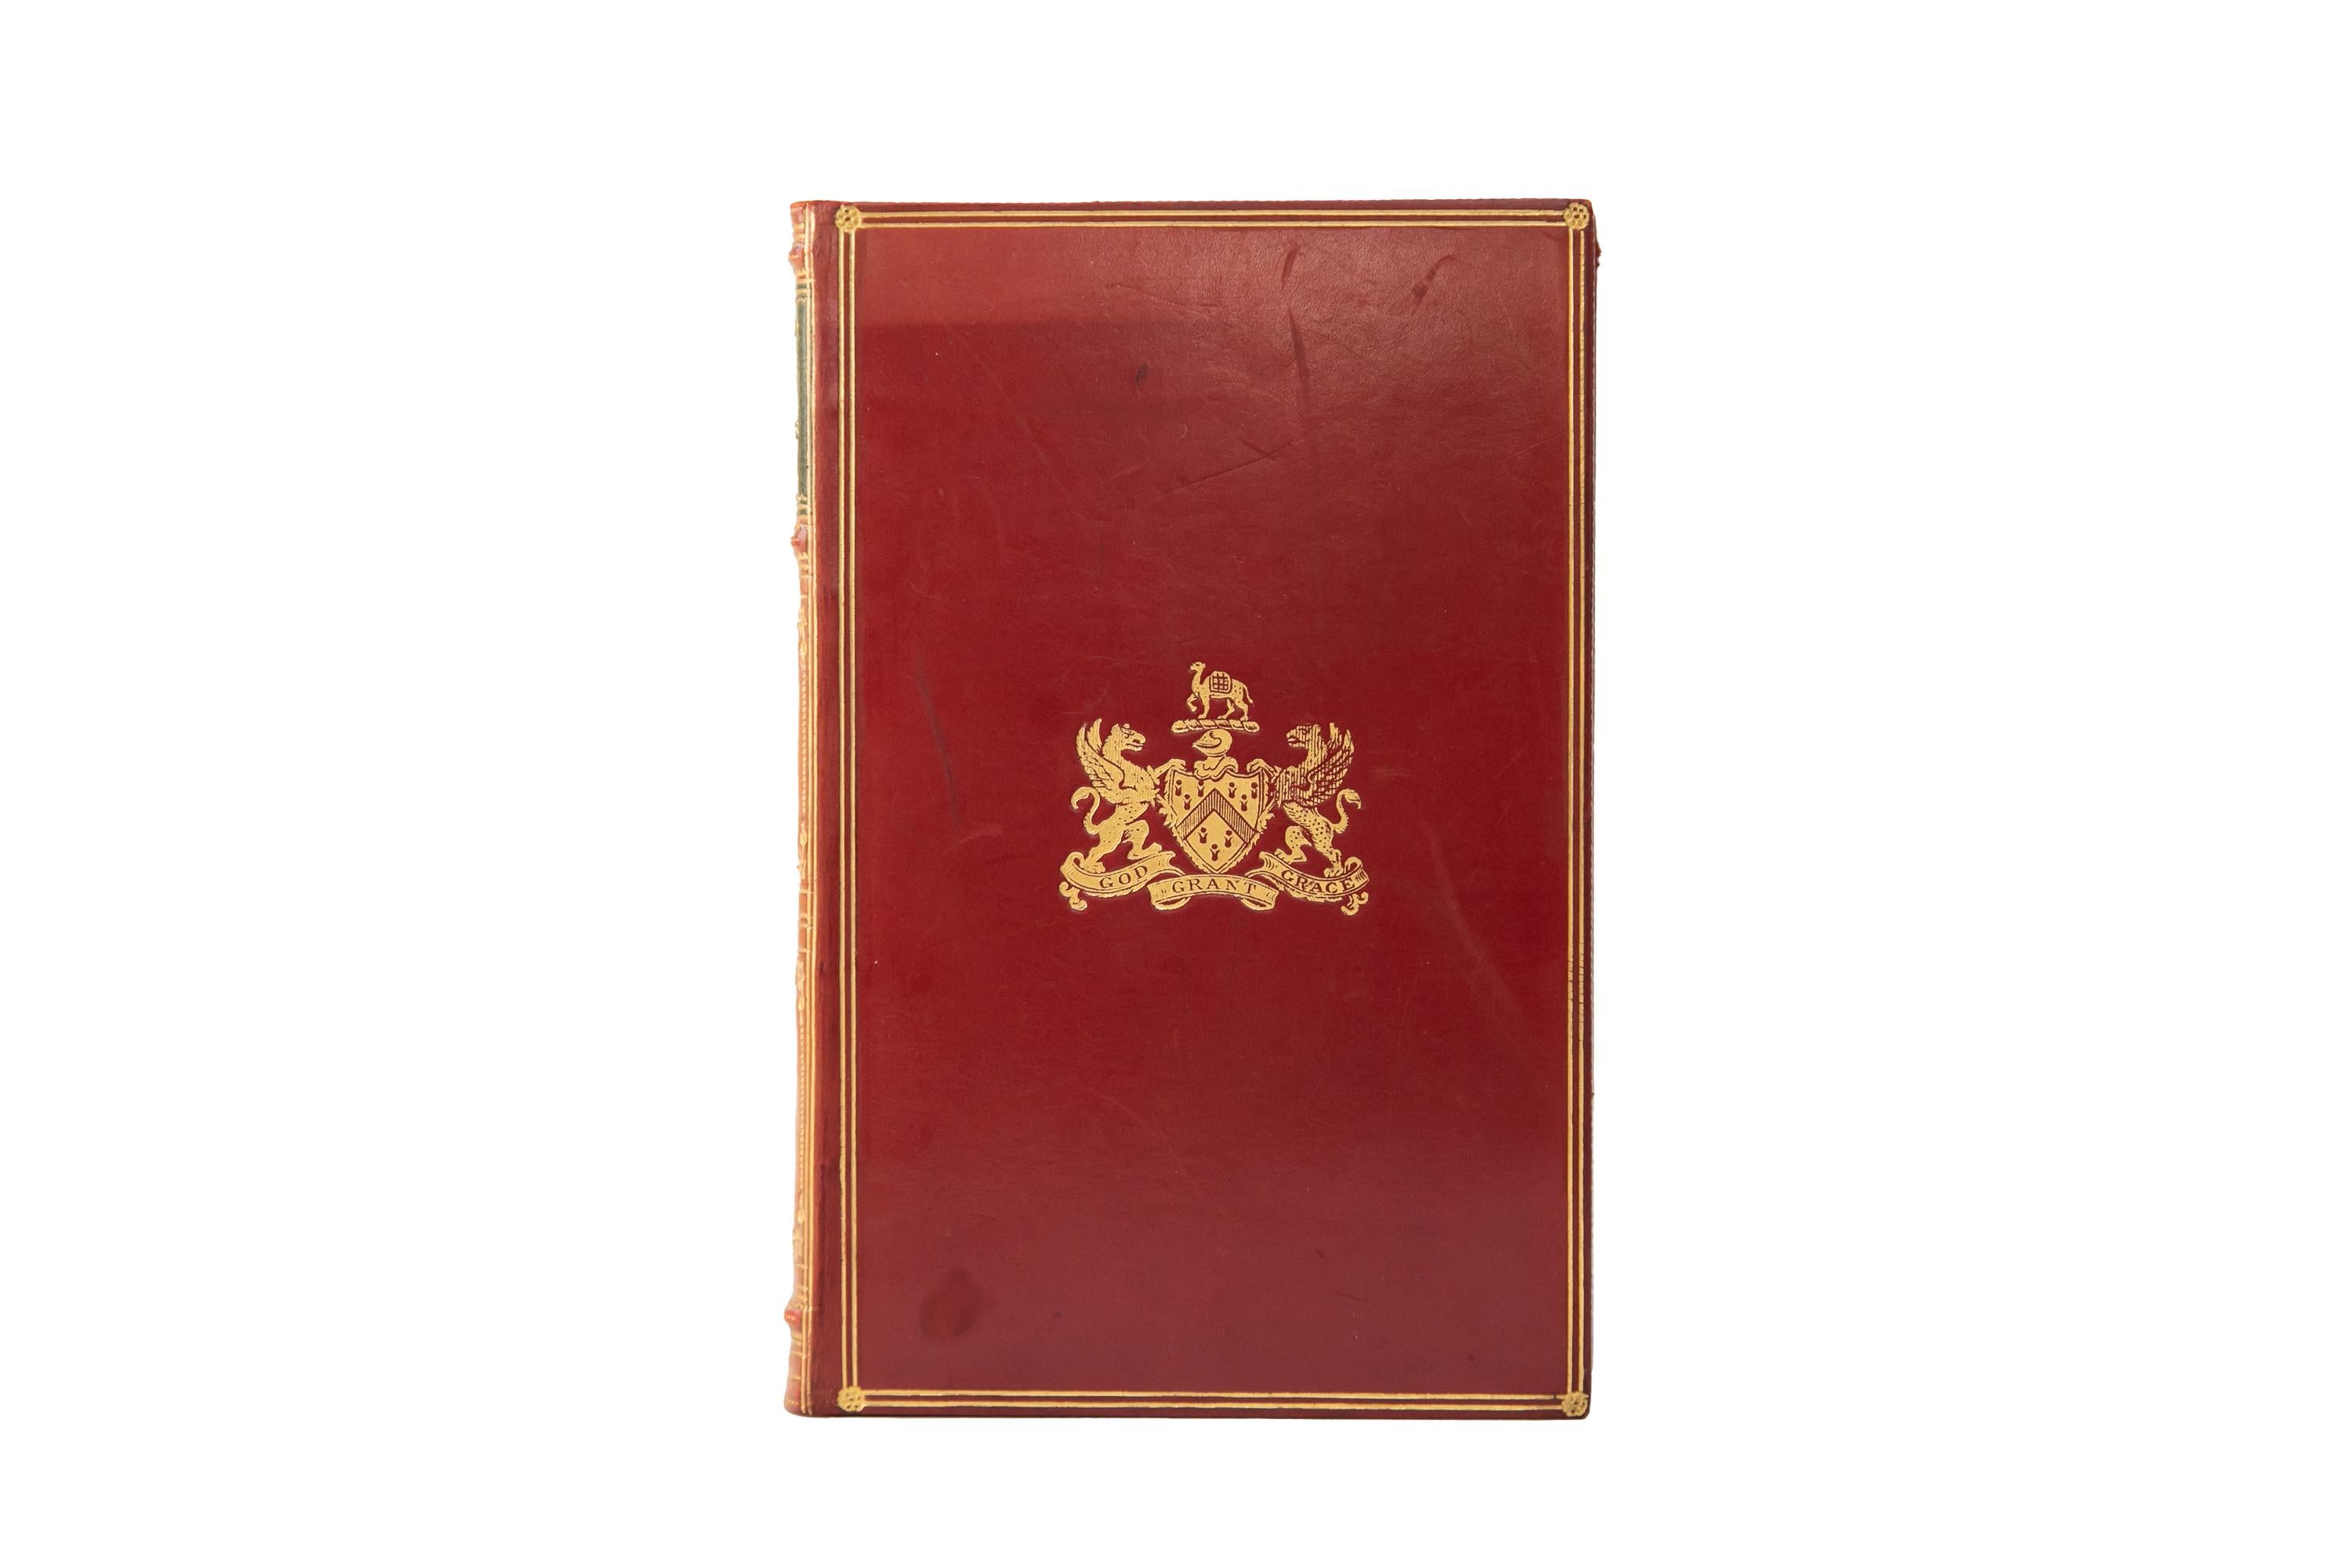 1 Volume. Arthur Quiller-Couch, Oxford Book of English Verse. Bound in full red calf with a crest and border on the cover, both gilt-tooled and gilt-tooled detailing, and a green morocco label on the raised band spine. All edges are dyed red with